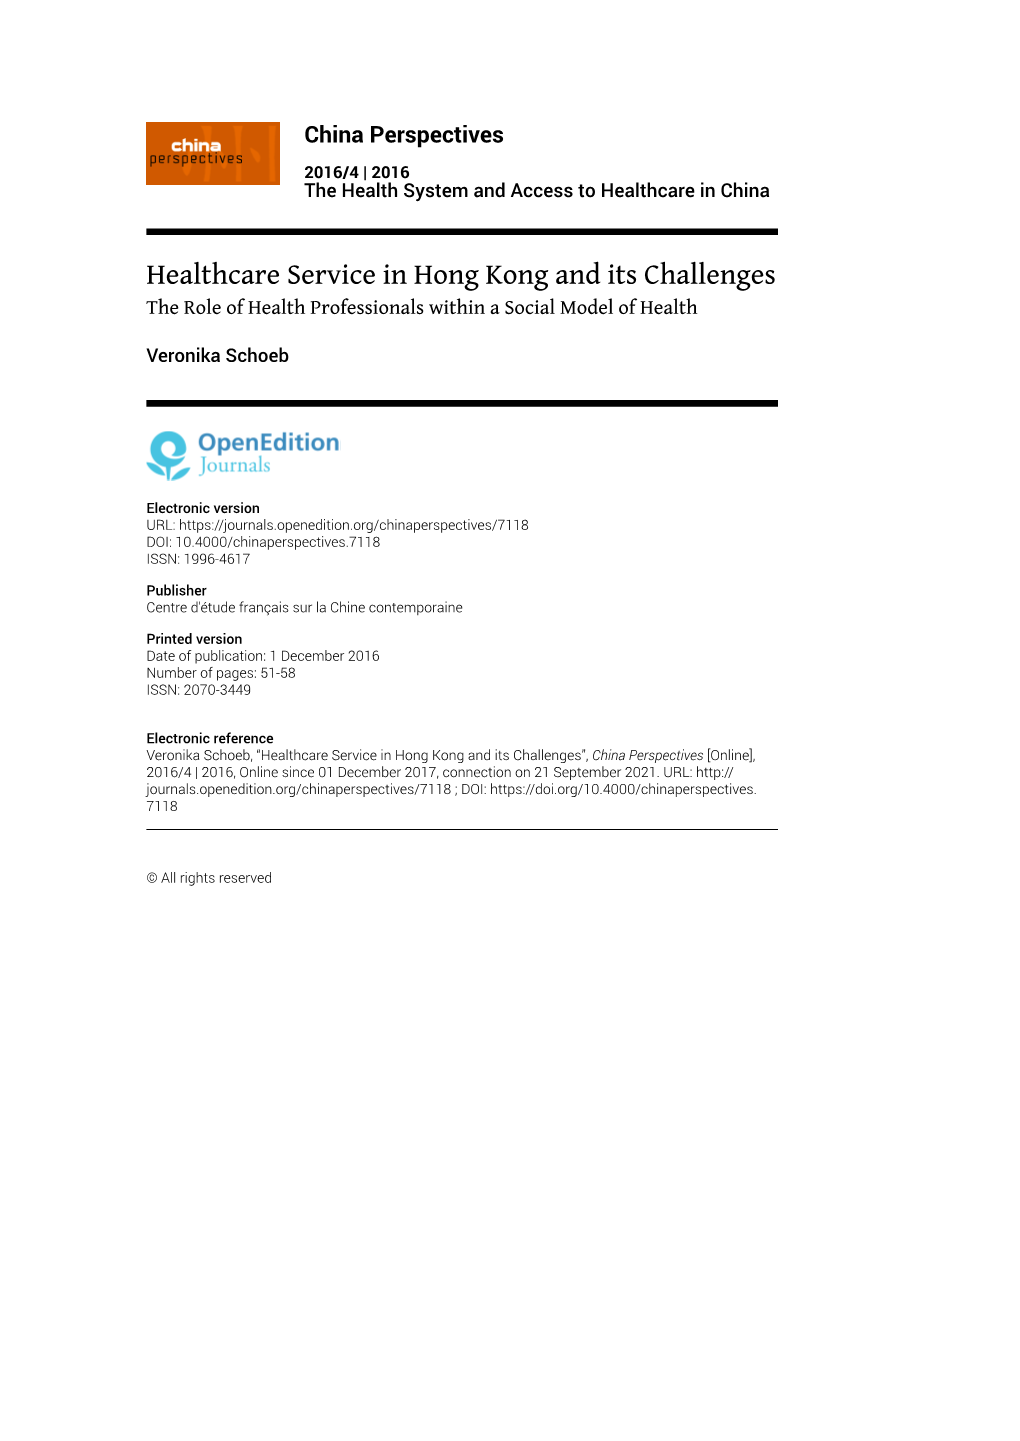 Healthcare Service in Hong Kong and Its Challenges the Role of Health Professionals Within a Social Model of Health